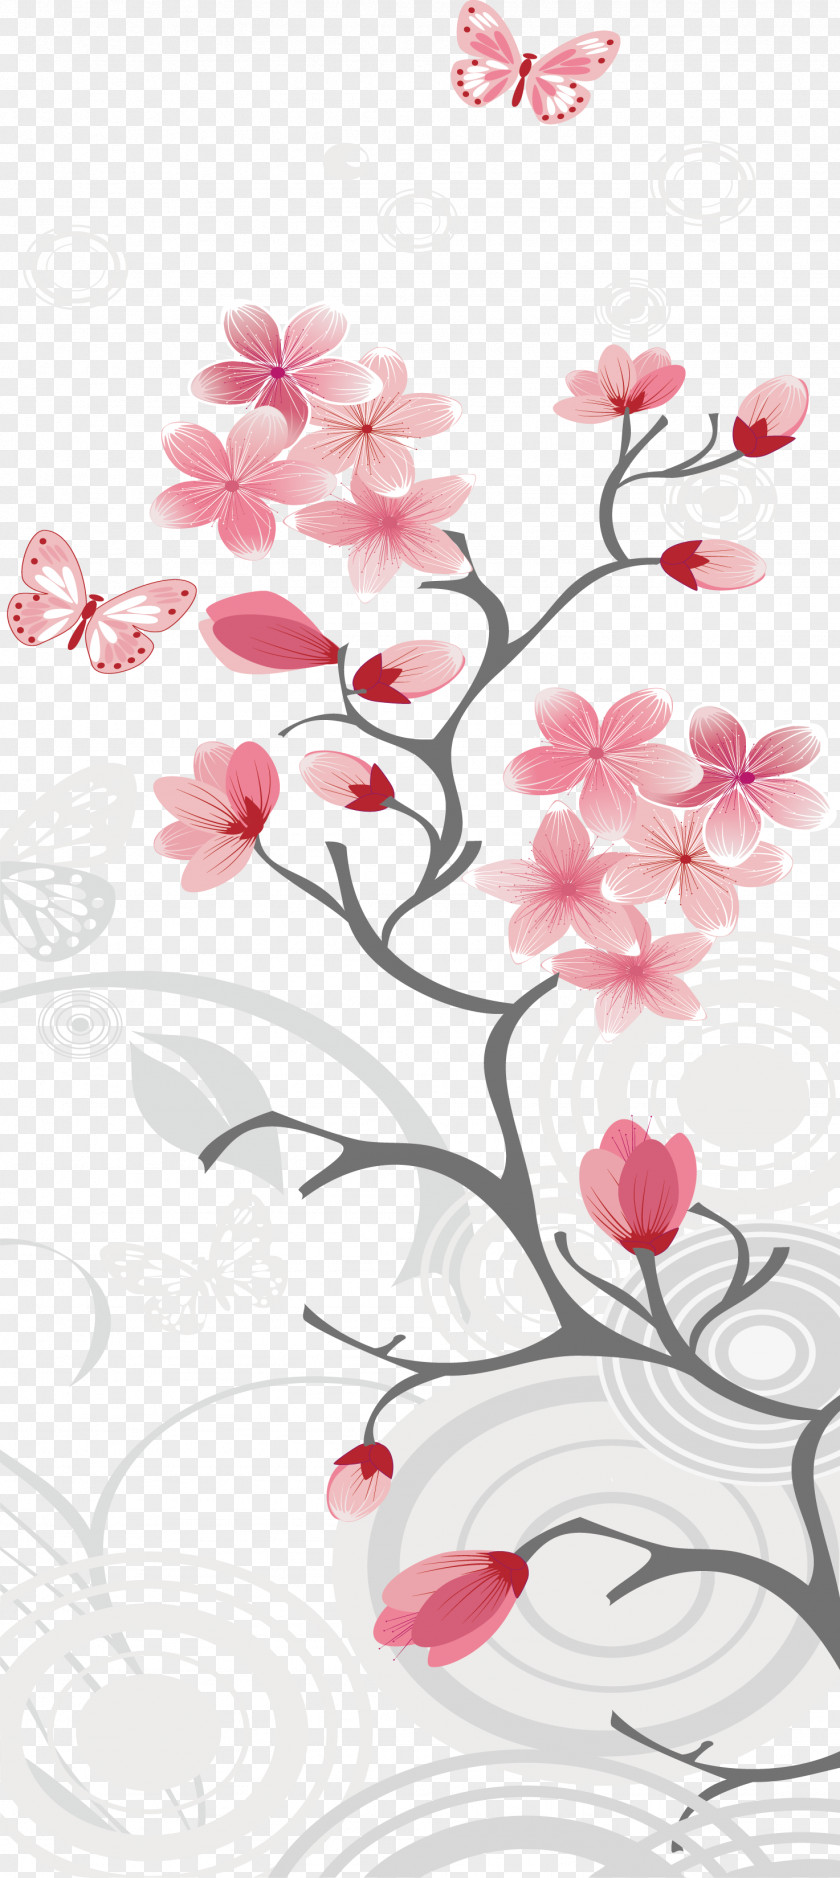 Japanese Hand-painted Cherry Blossoms Blossom Clip Art PNG